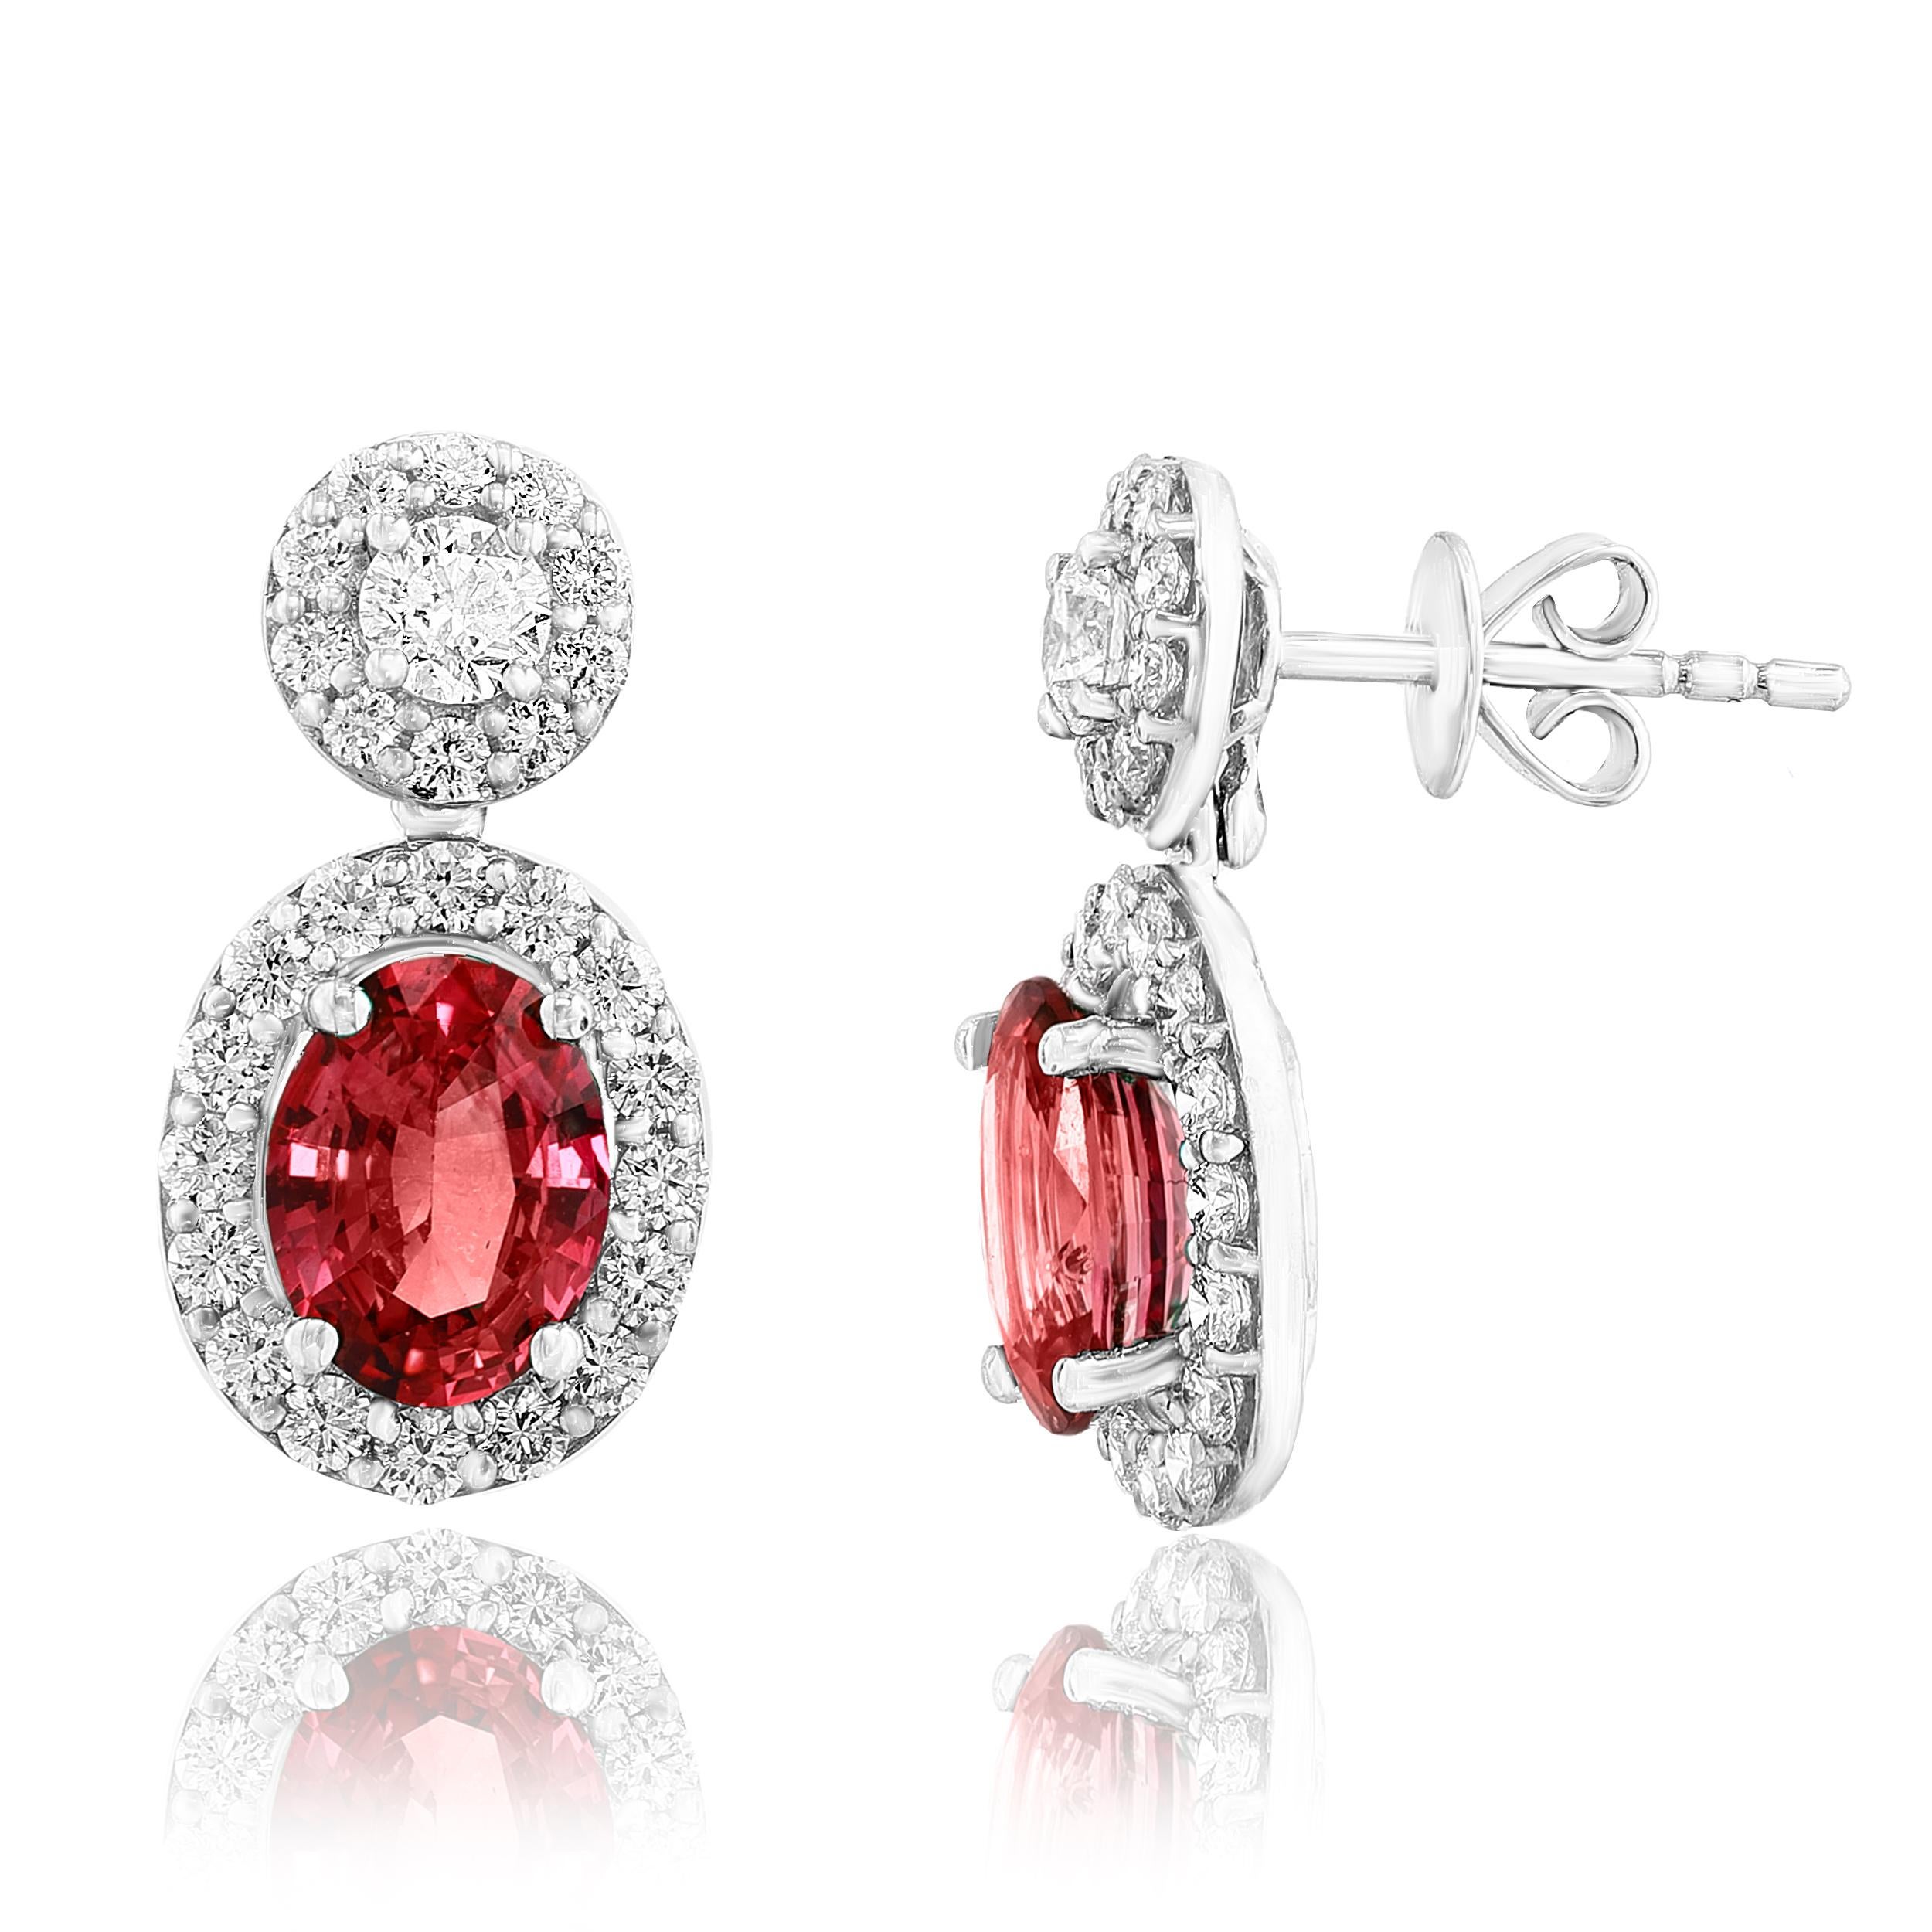 Contemporary 1.29 Carat of Oval Shape Ruby and Diamond Drop Earrings in 18K White Gold For Sale